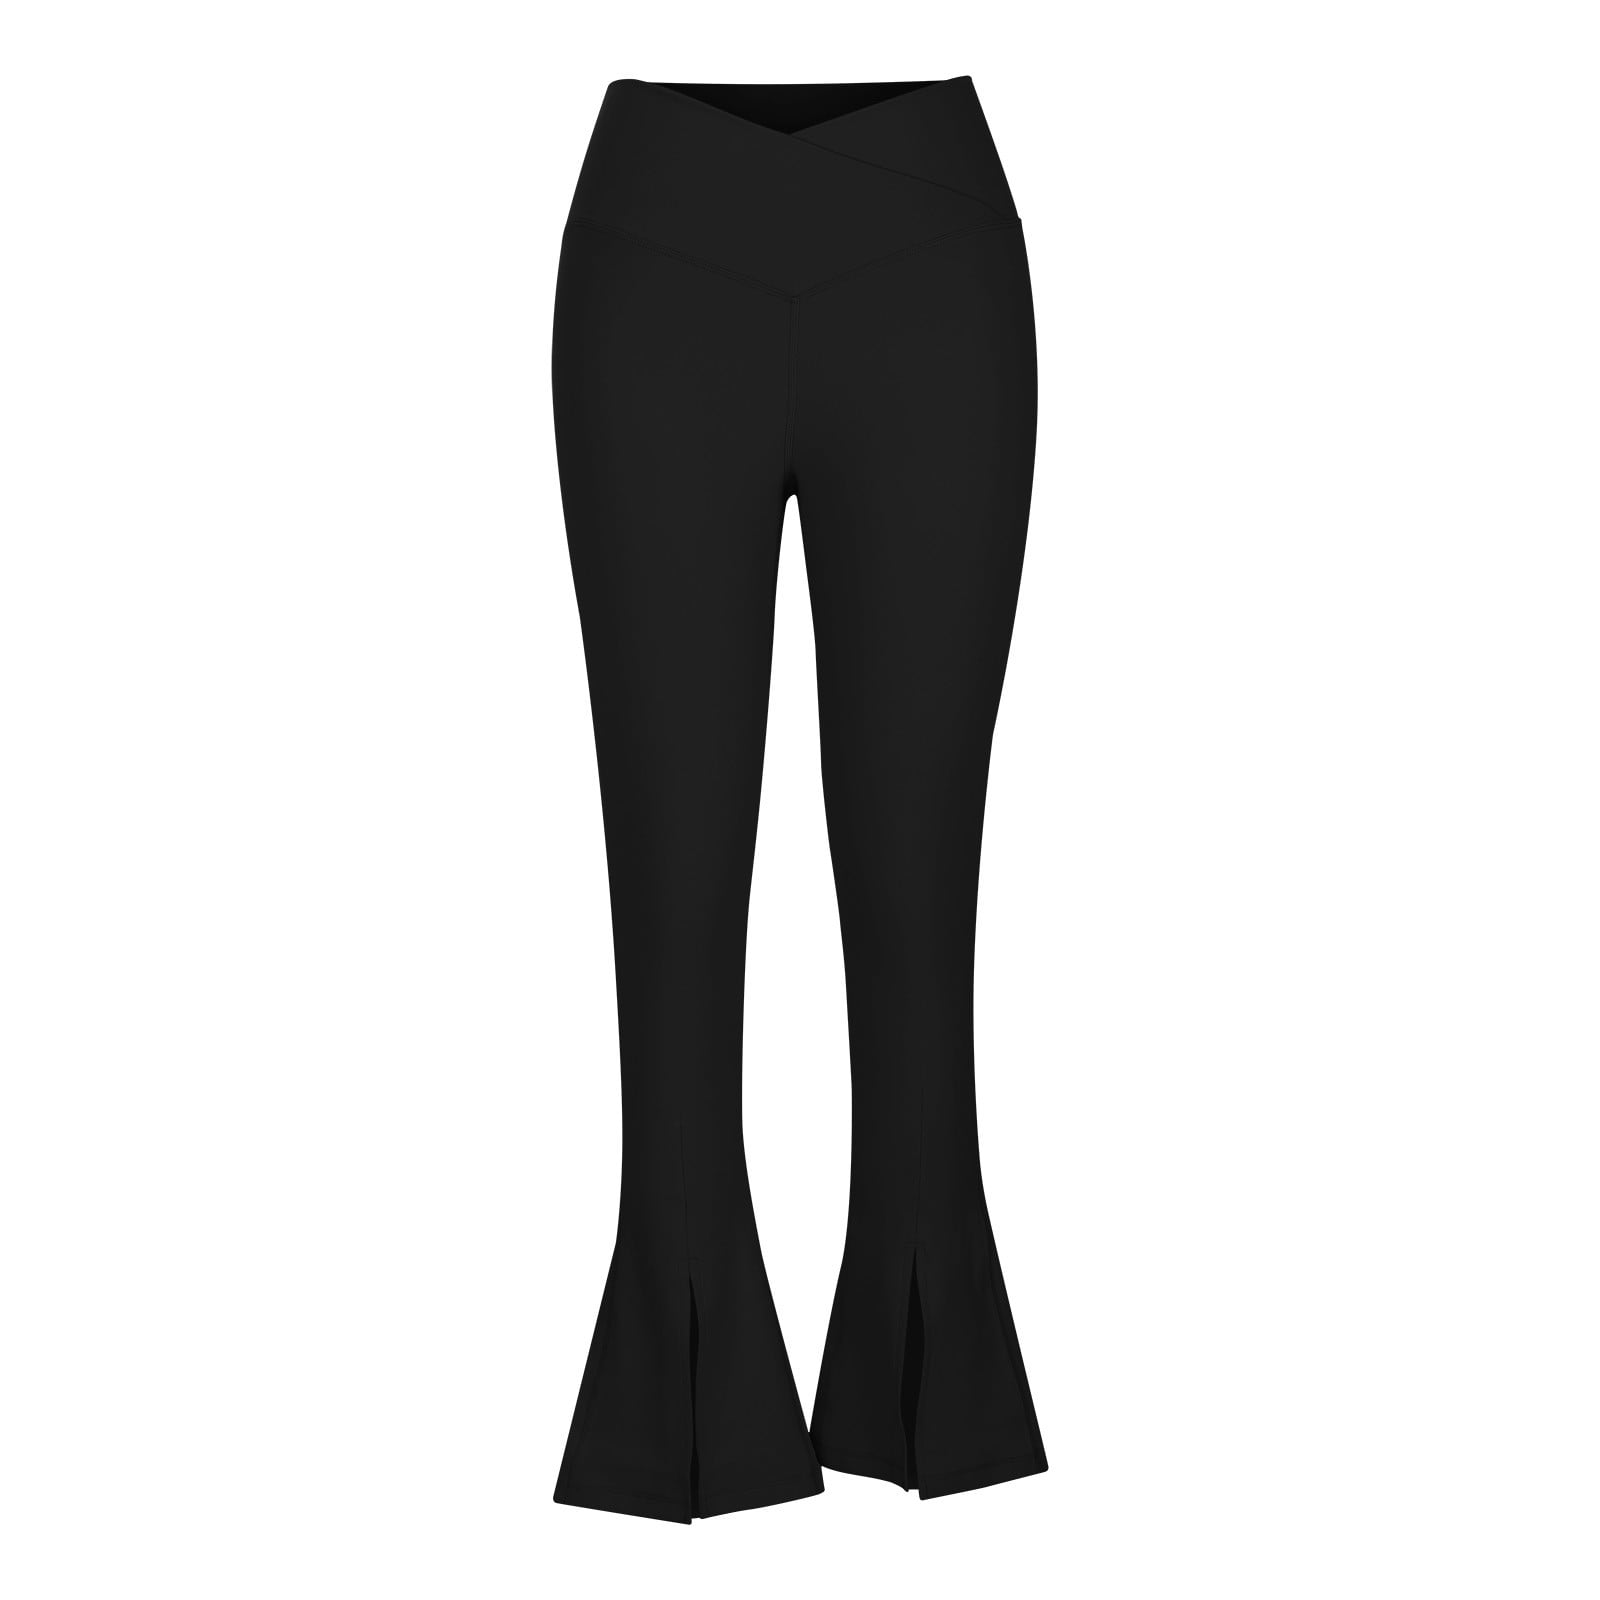 YWDJ Tights for Women Workout Flare Long Length Capris High Waist Casual  Sports Yogalicious Crossover Boot Cut Summer Utility Dressy Everyday Soft